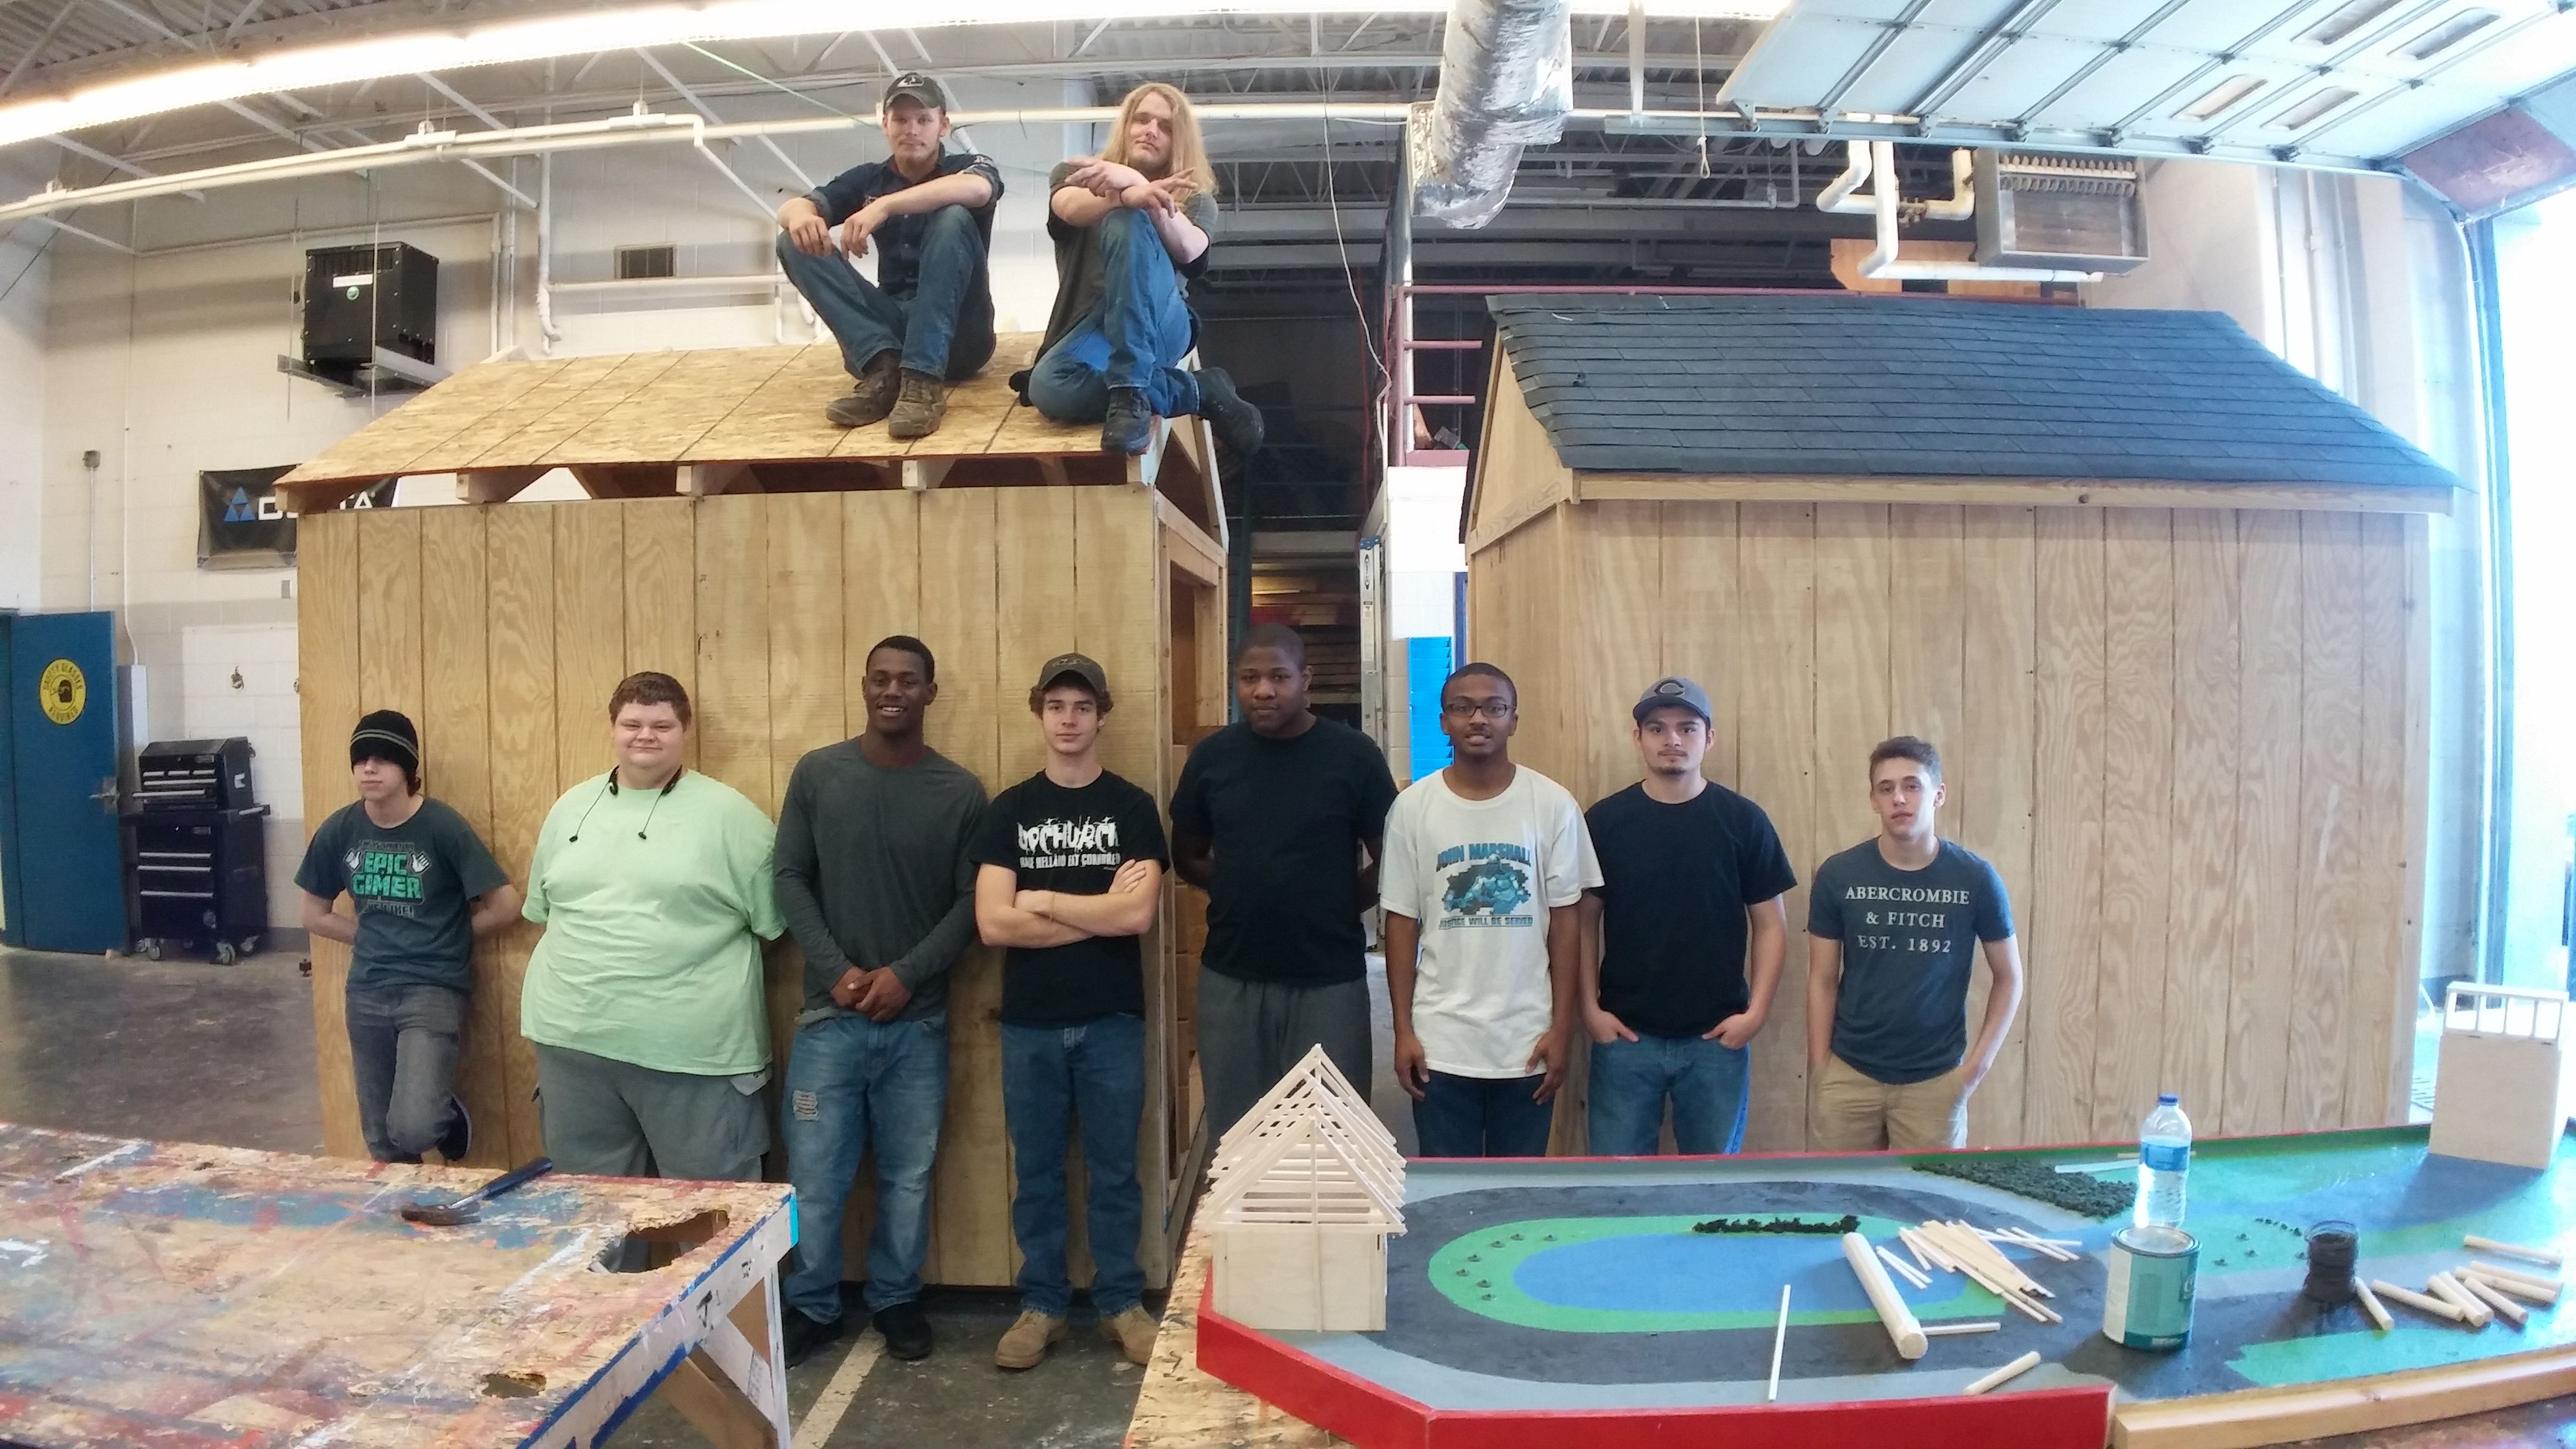 Cumberland students build more sheds